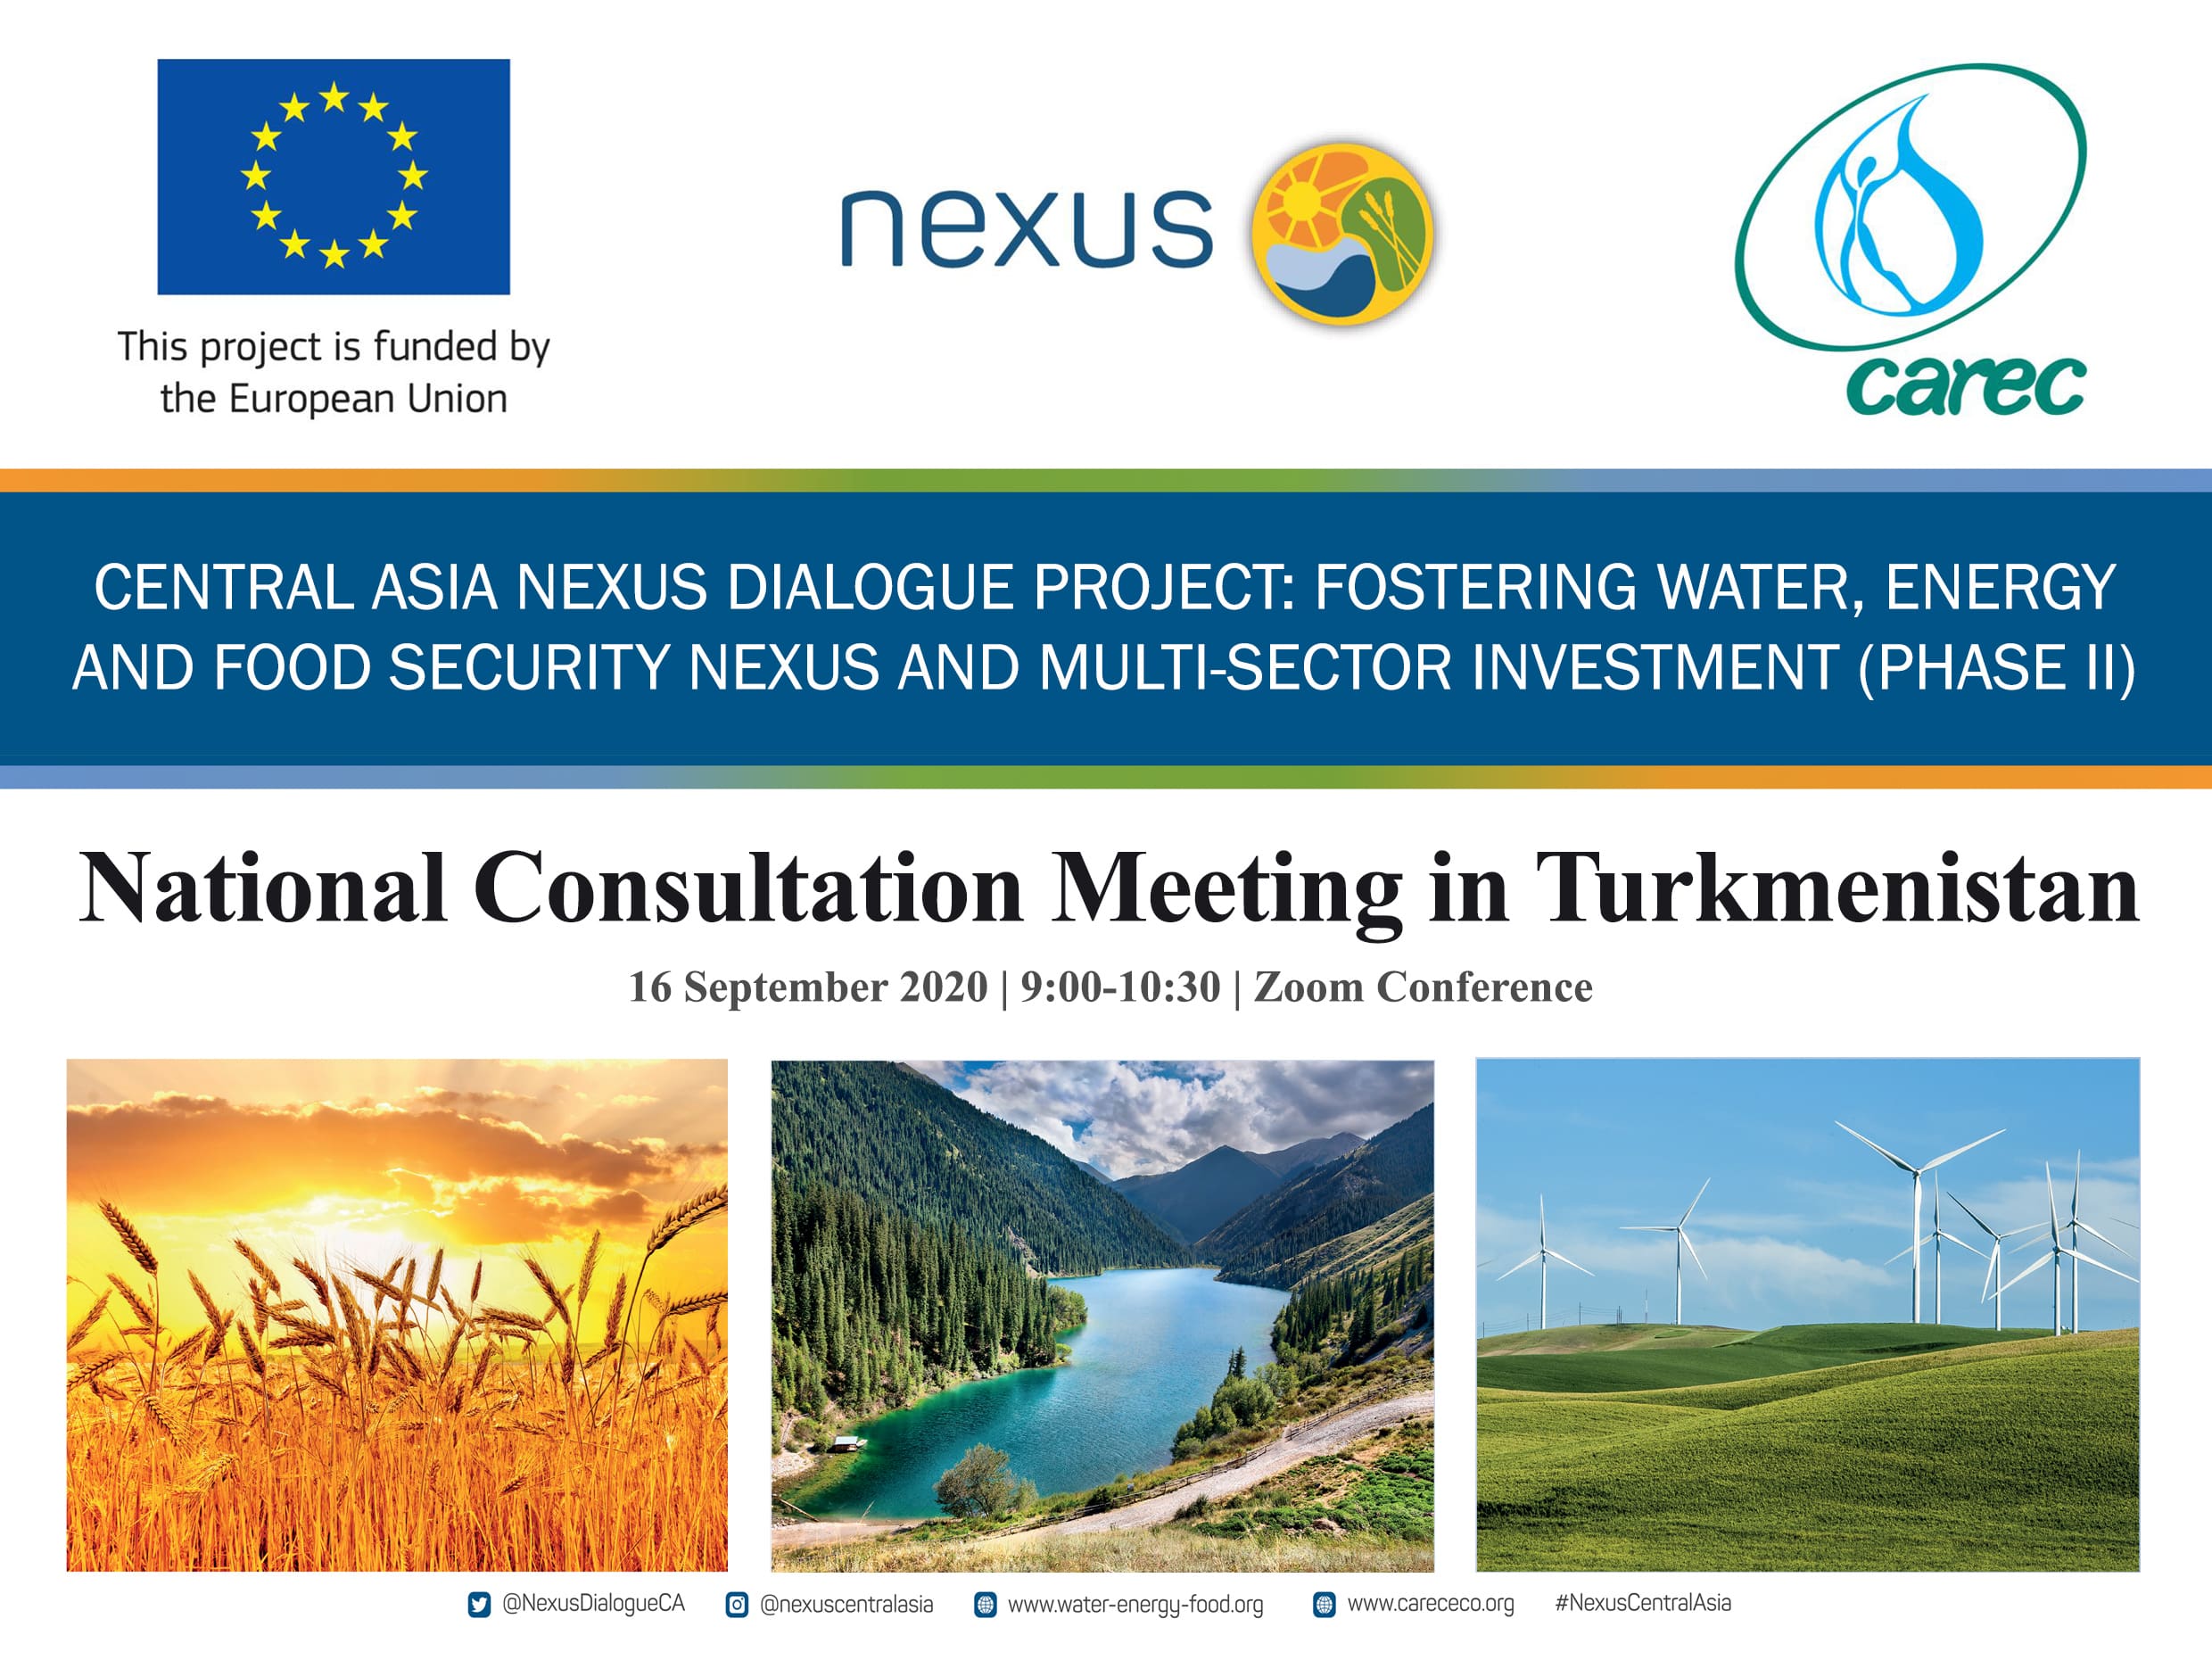 The First National Consultative Meeting in the Republic of Turkmenistan  in the framework of the European Union “Central Asia Nexus Dialogue Project”